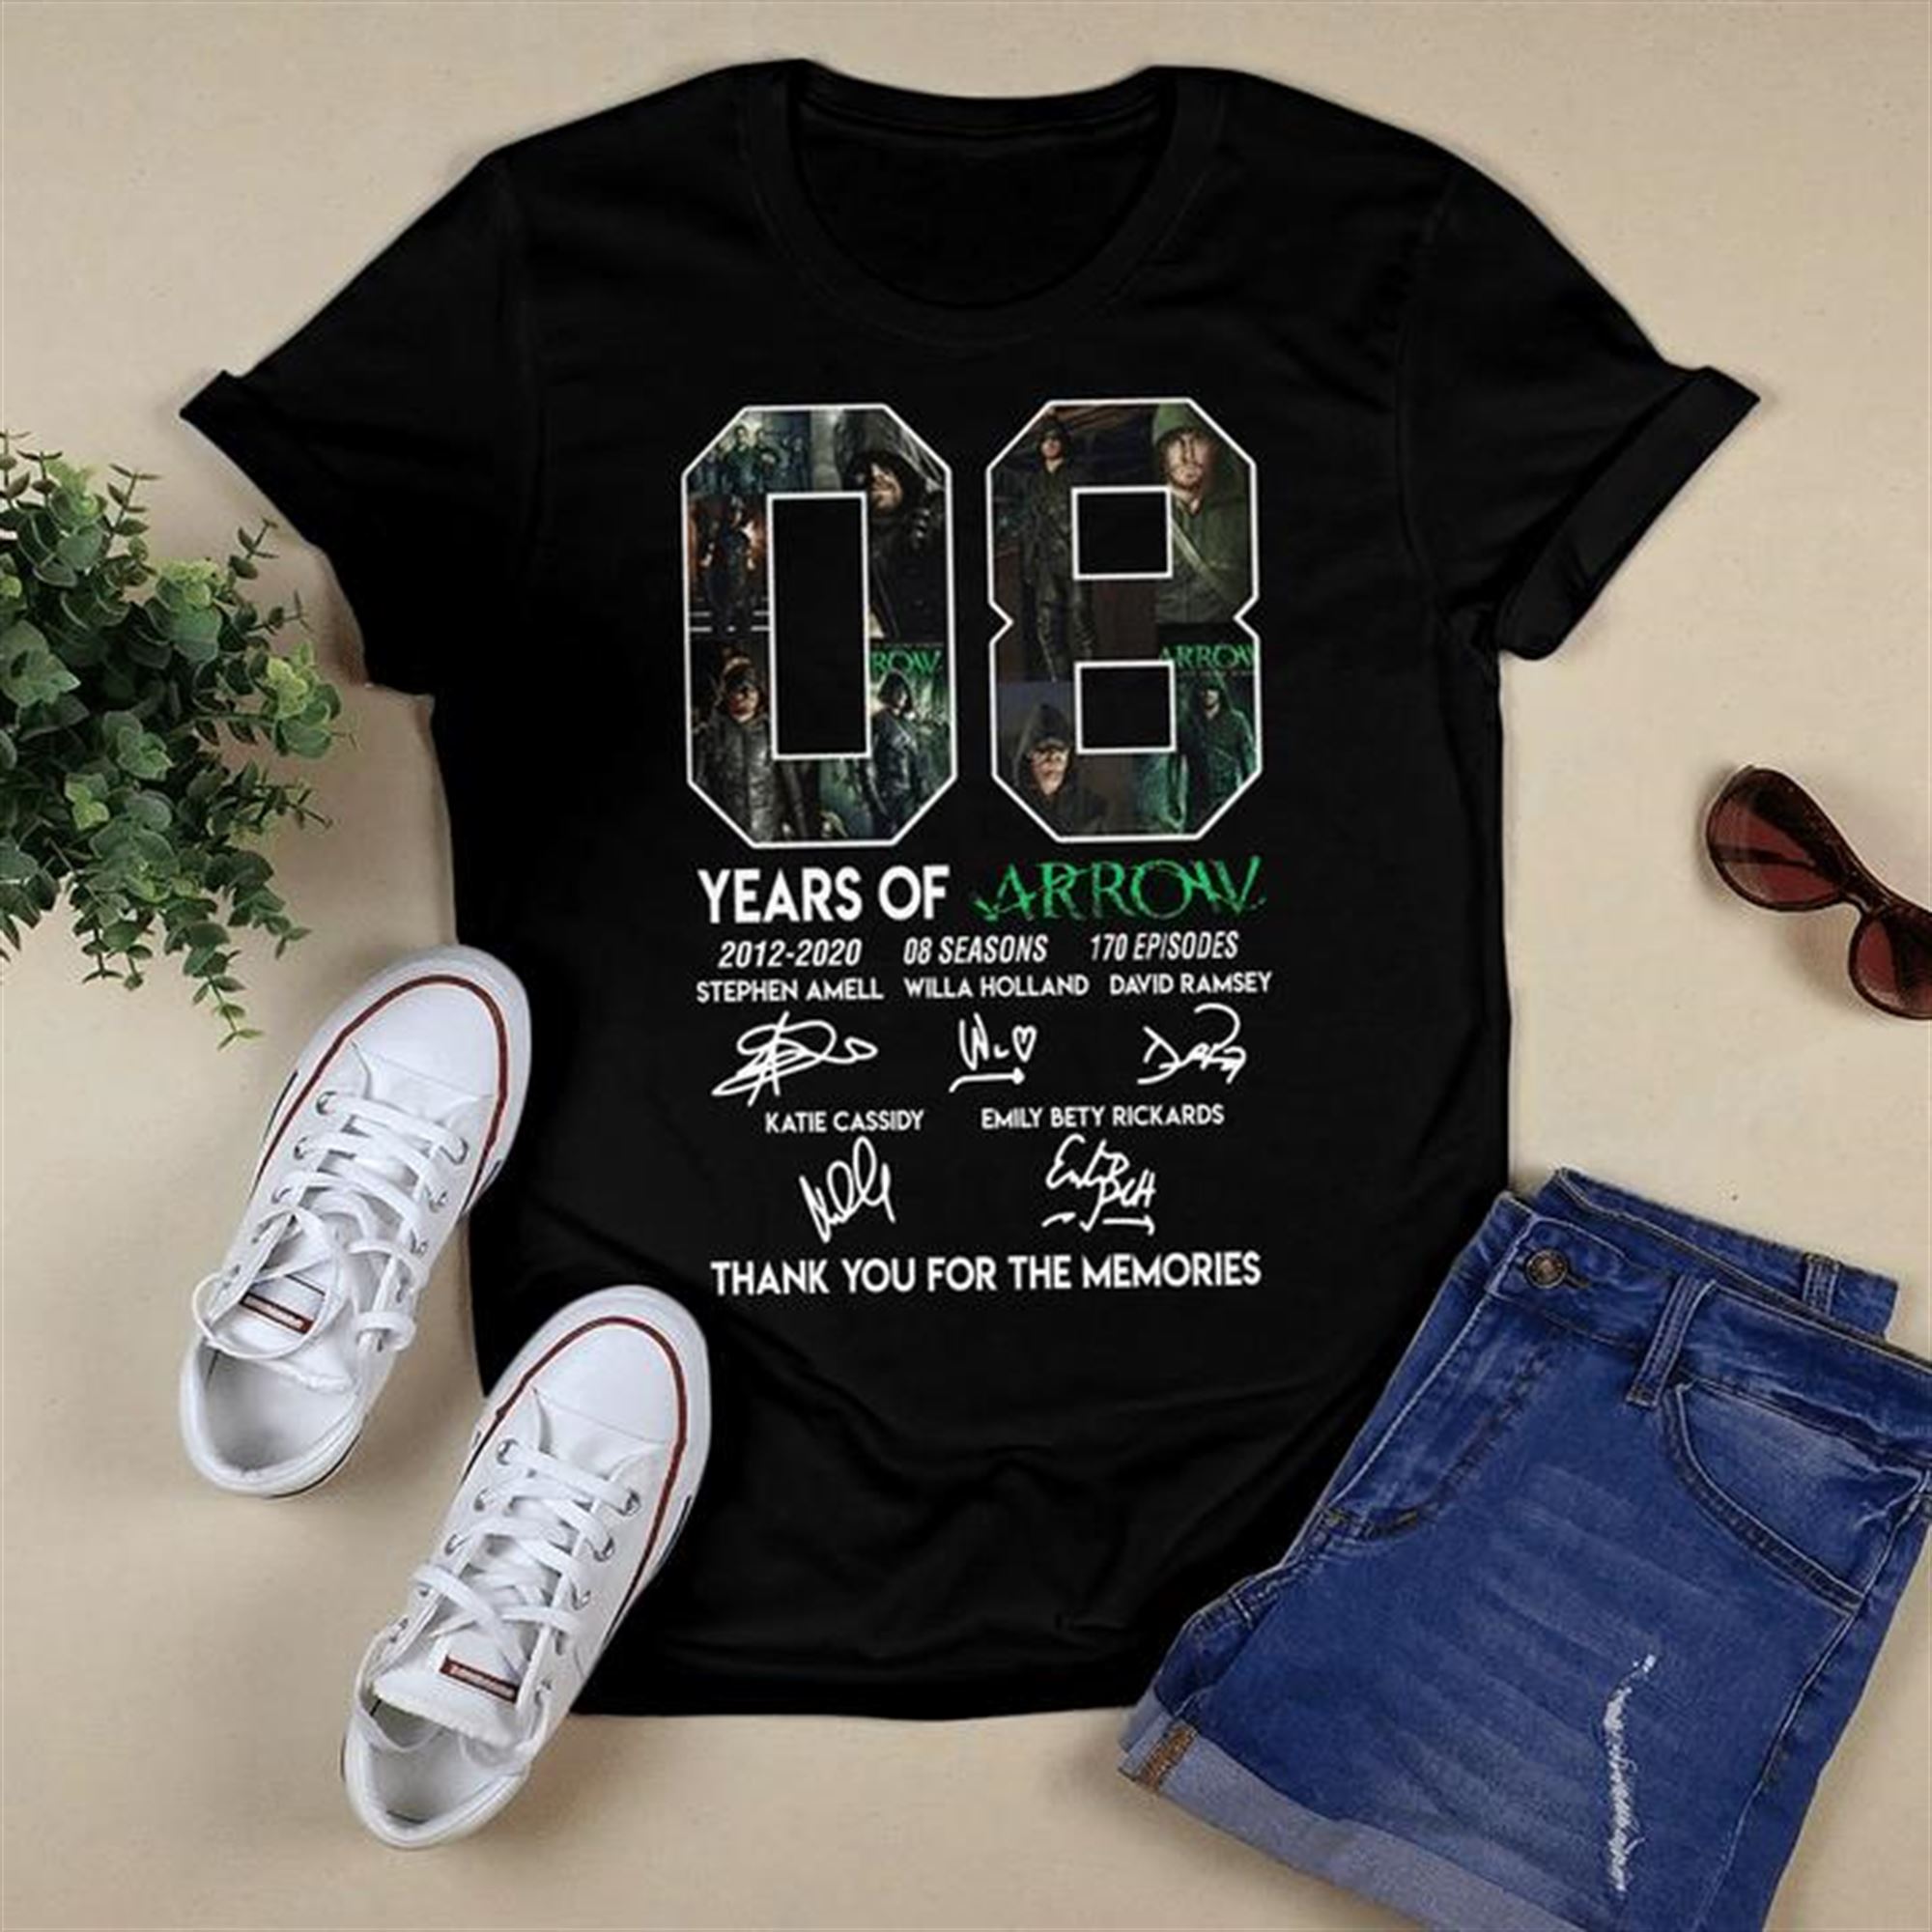 Arrow Signatures Thank You For The Memories T-shirt Size Up To 5xl